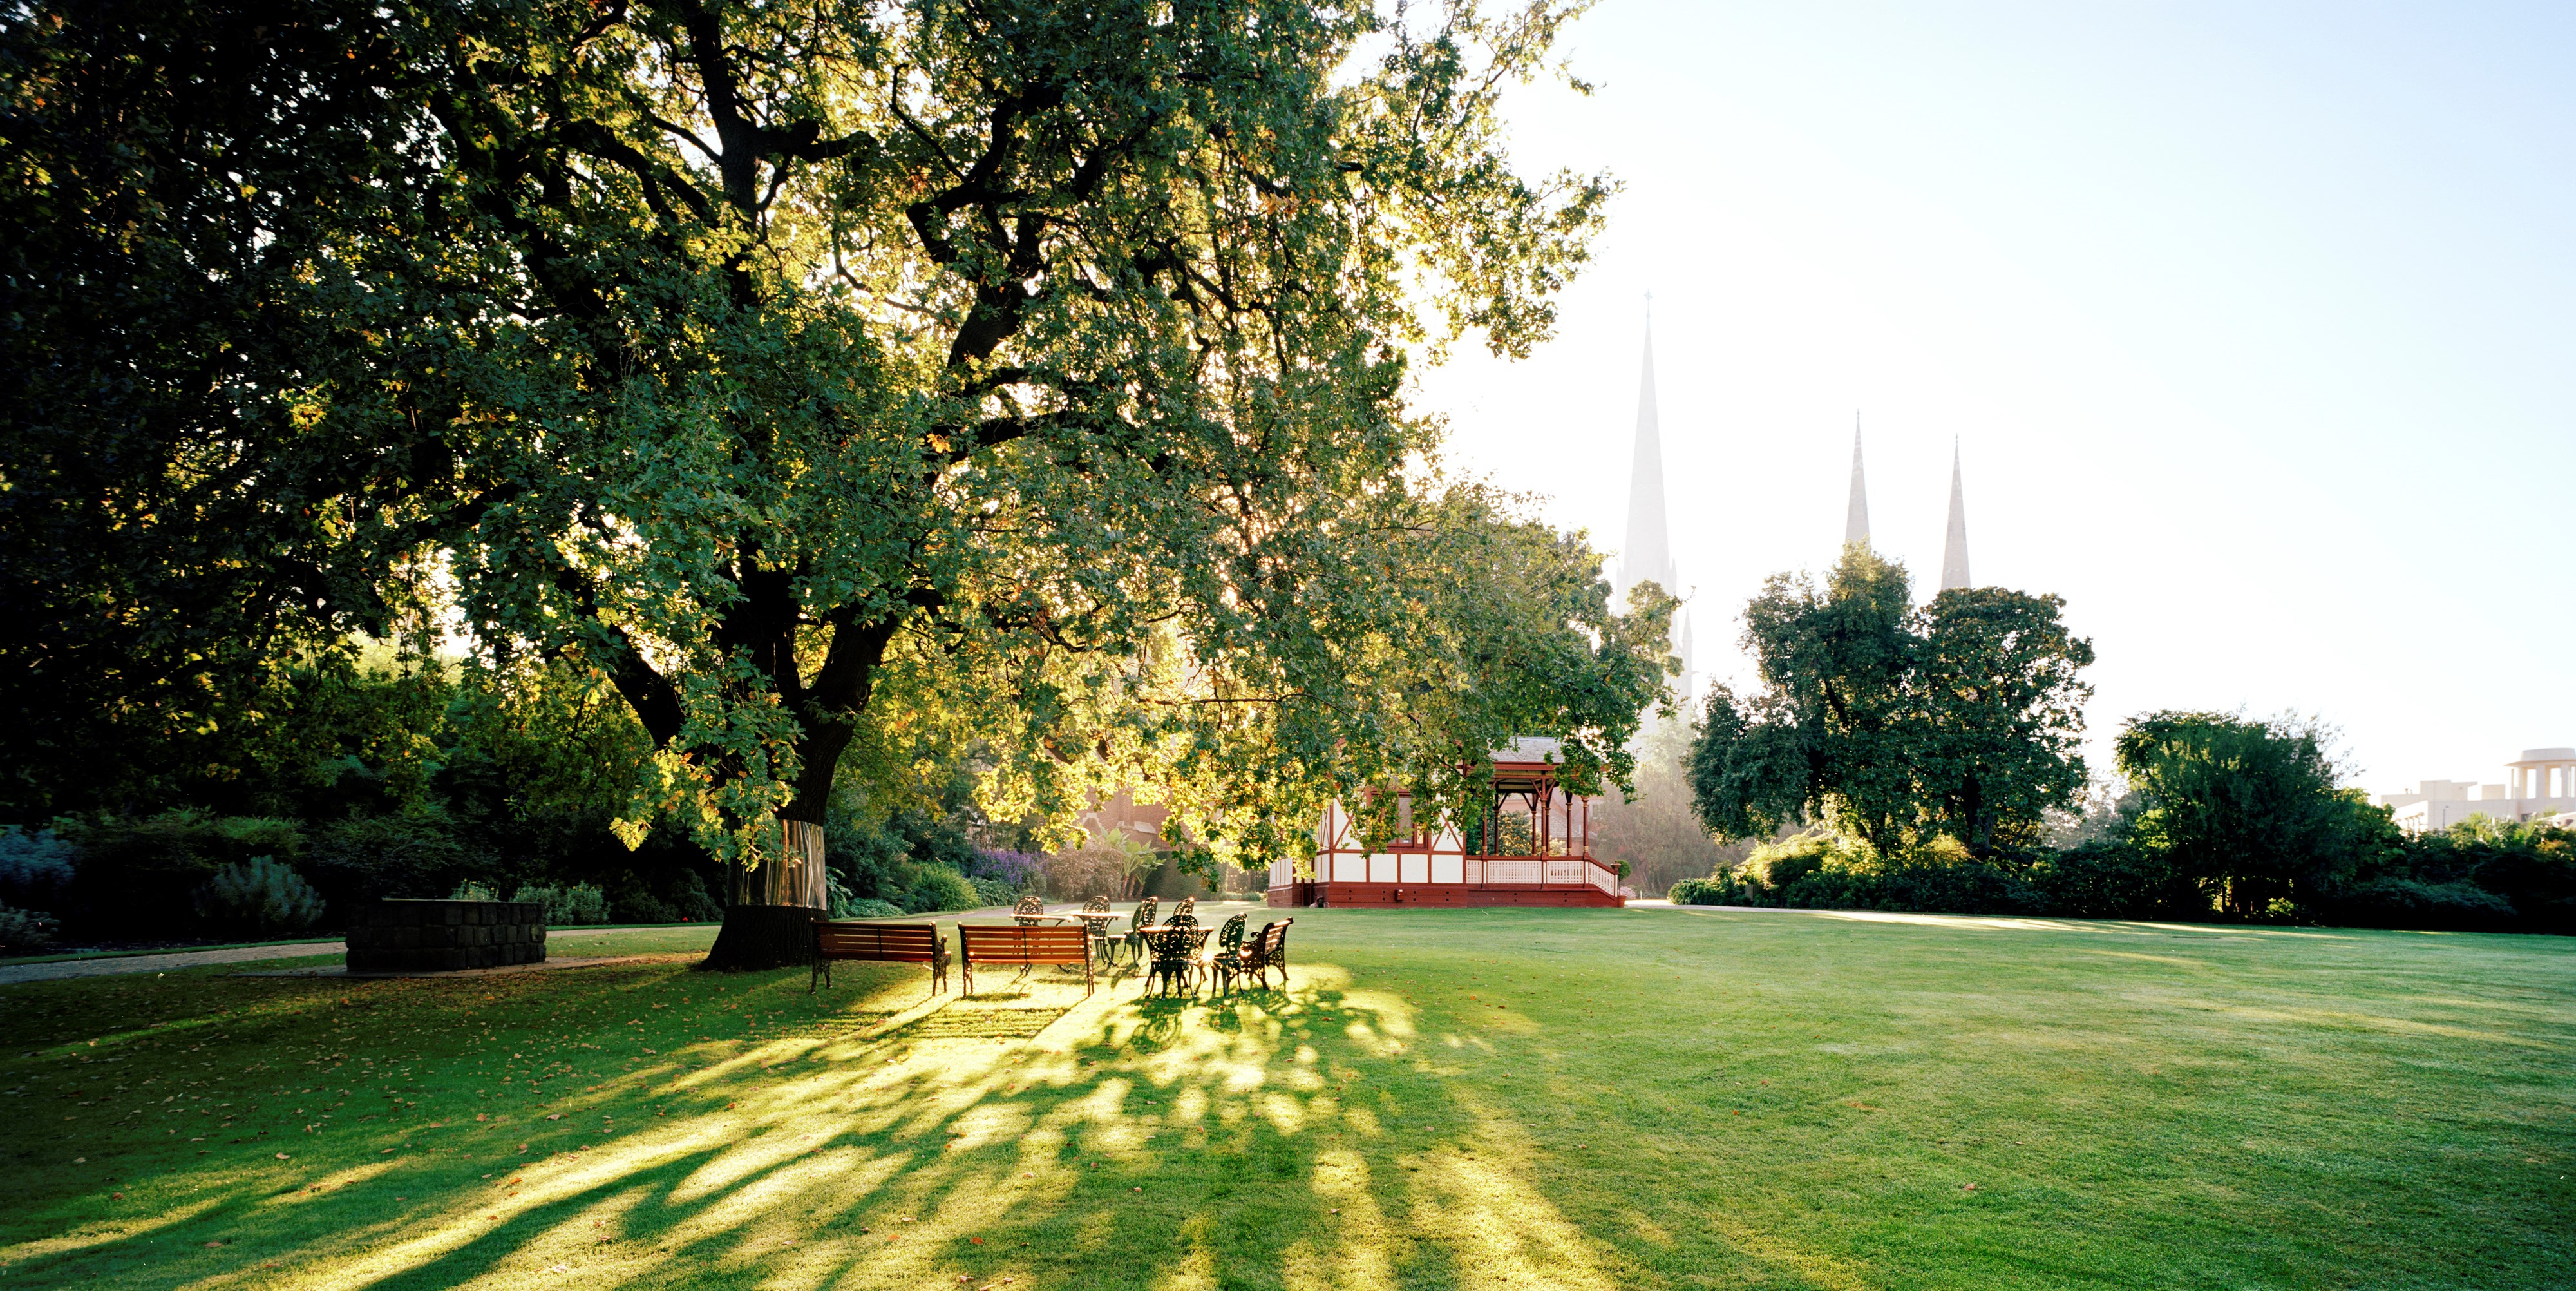 A misty early morning on a green lawn in the garden. Chairs and tables are grouped under a large tree. Sunlight is streaming through the branches and casting shadows on the grass.  A pavilion can be seen in the background, and  in the distance there is three church spires. 